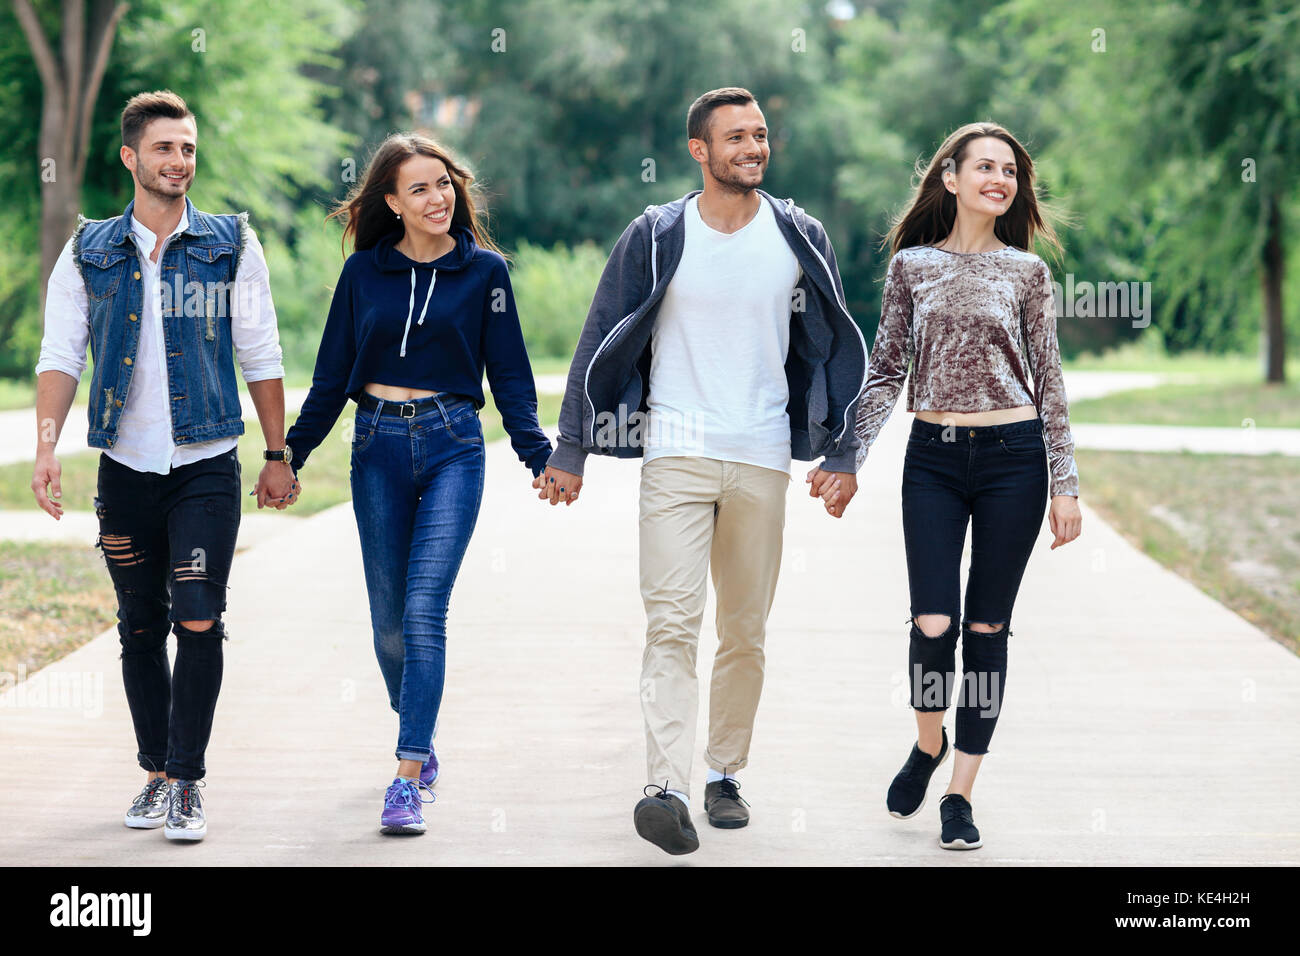 Full-length portrait of young friends holding hands walking in park. Four people happy looking at camera. Two guys and two girls in stylish casual clo Stock Photo